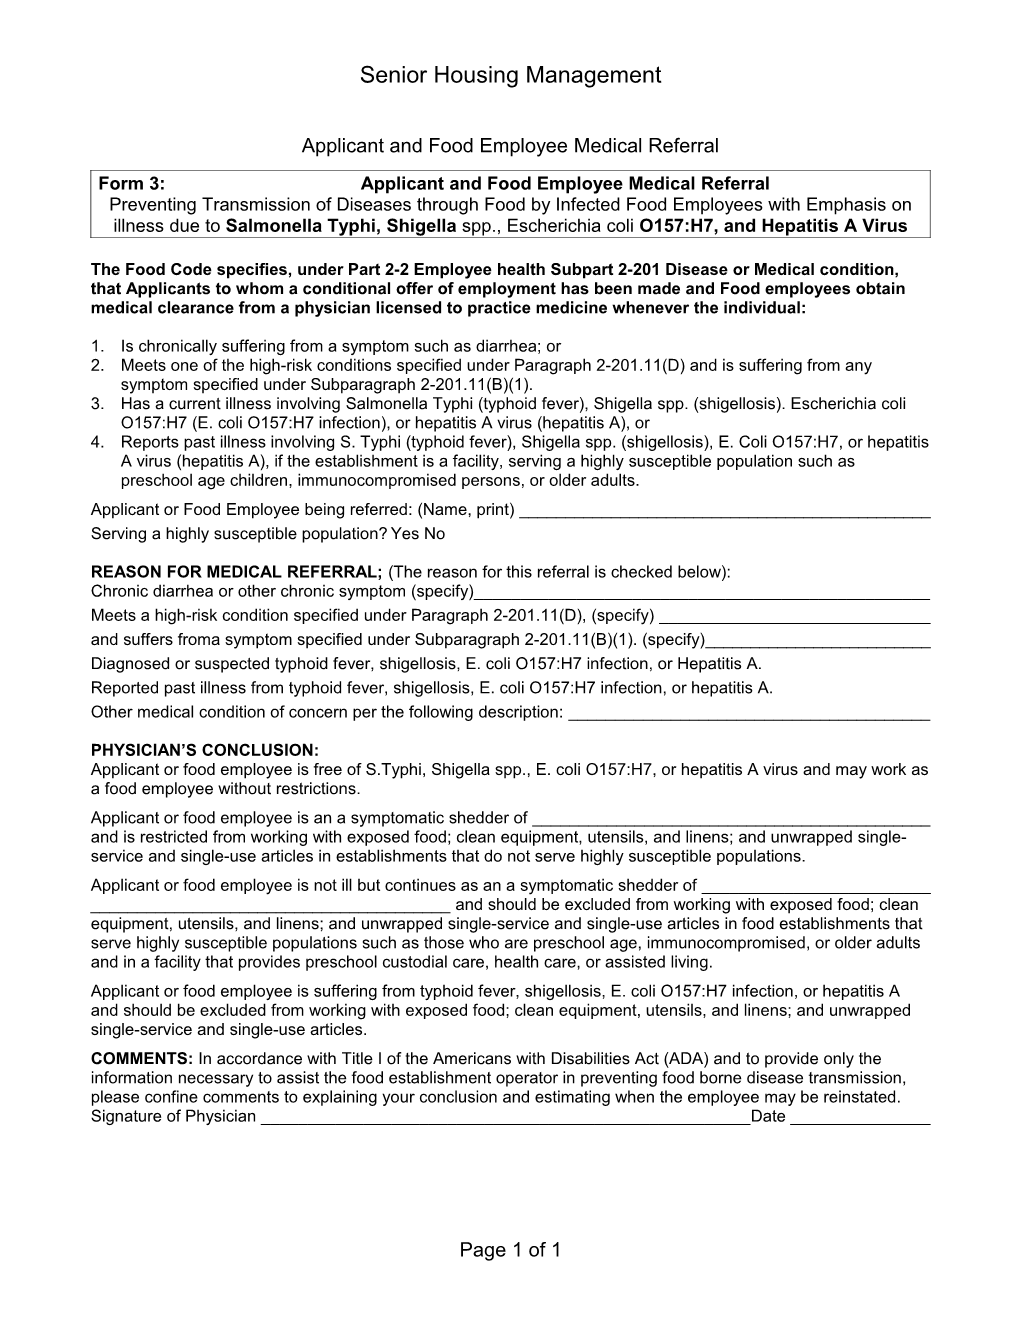 Form 2: Food Employee Reporting Agreement